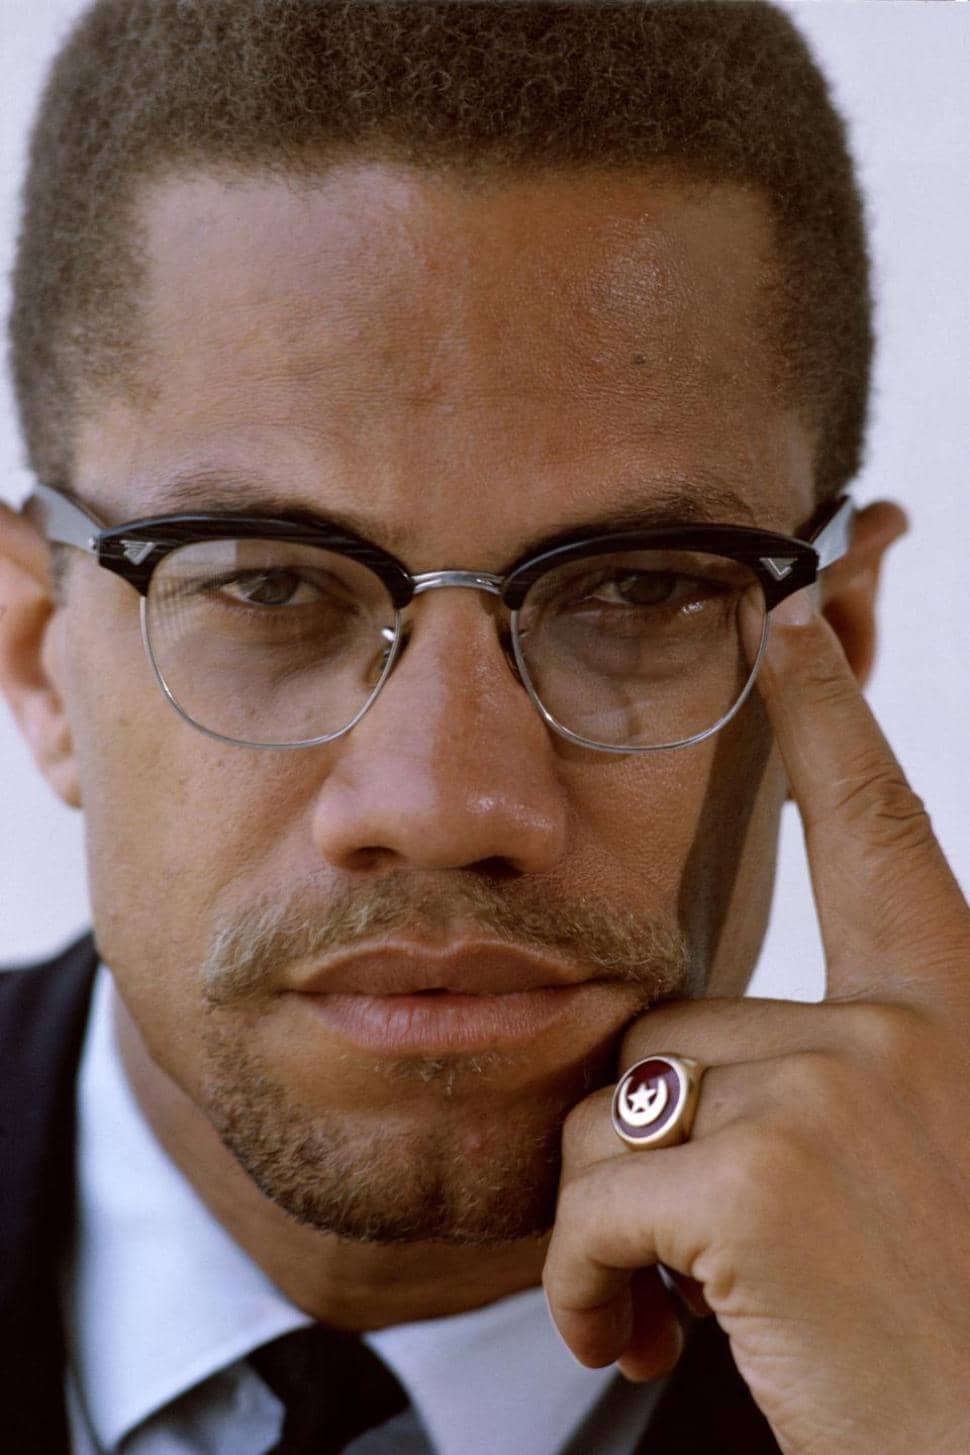 Malcolm-X-classic-pose-color-cy-Estate-of-John-Launois, Meet a poor righteous teacher, Behind Enemy Lines 